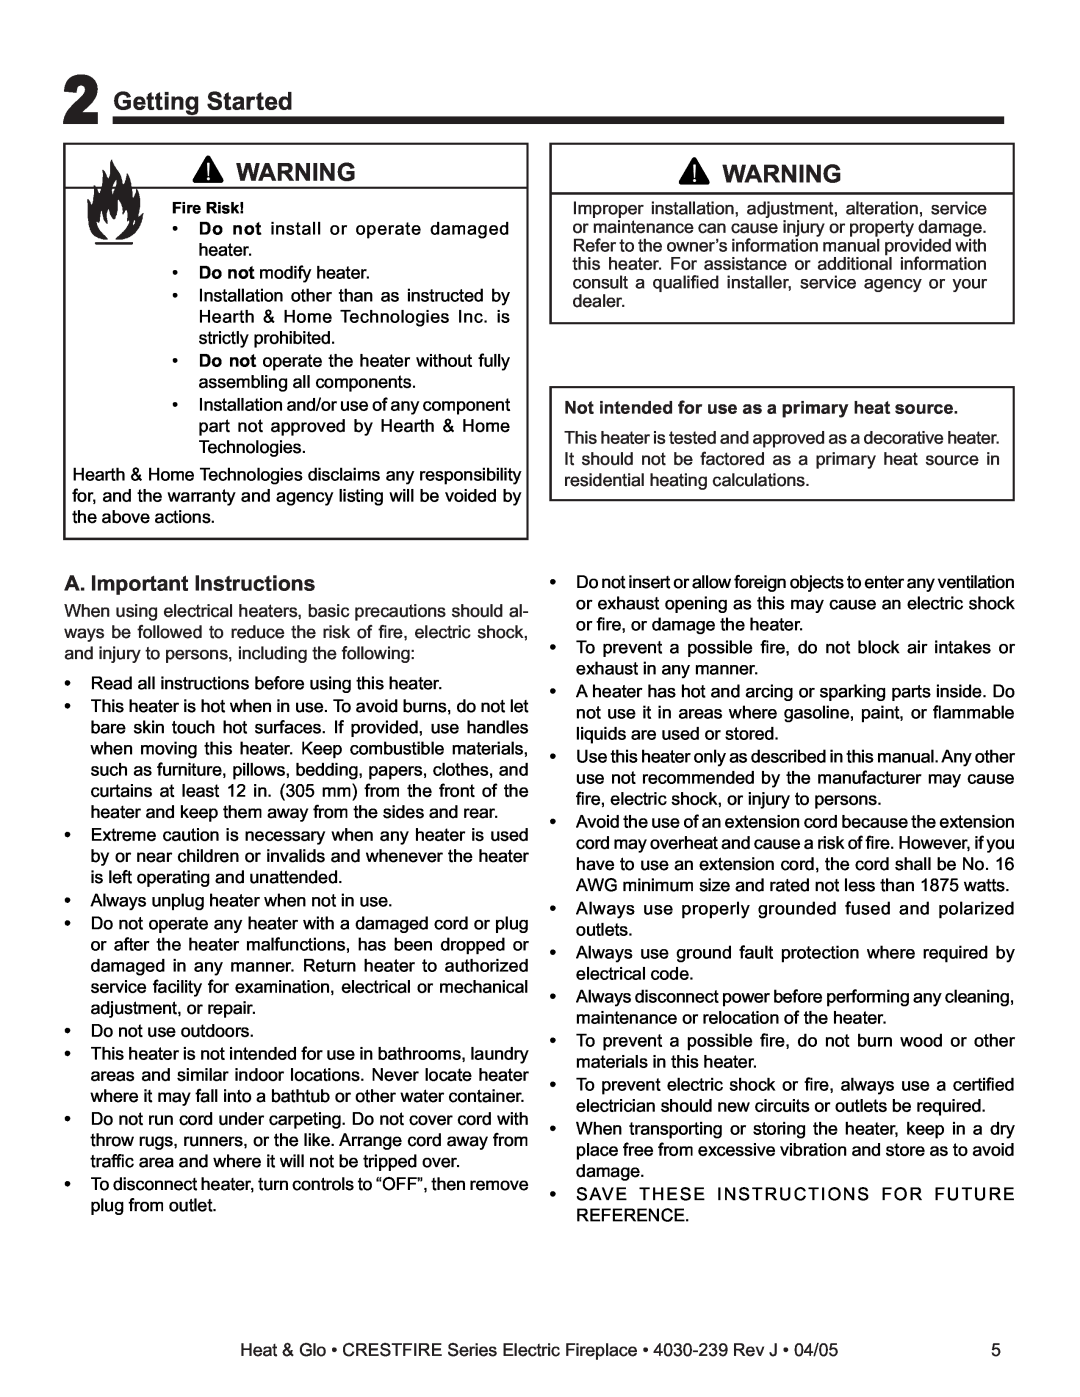 Heat & Glo LifeStyle CF750ENH Getting Started, A. Important Instructions, Not intended for use as a primary heat source 